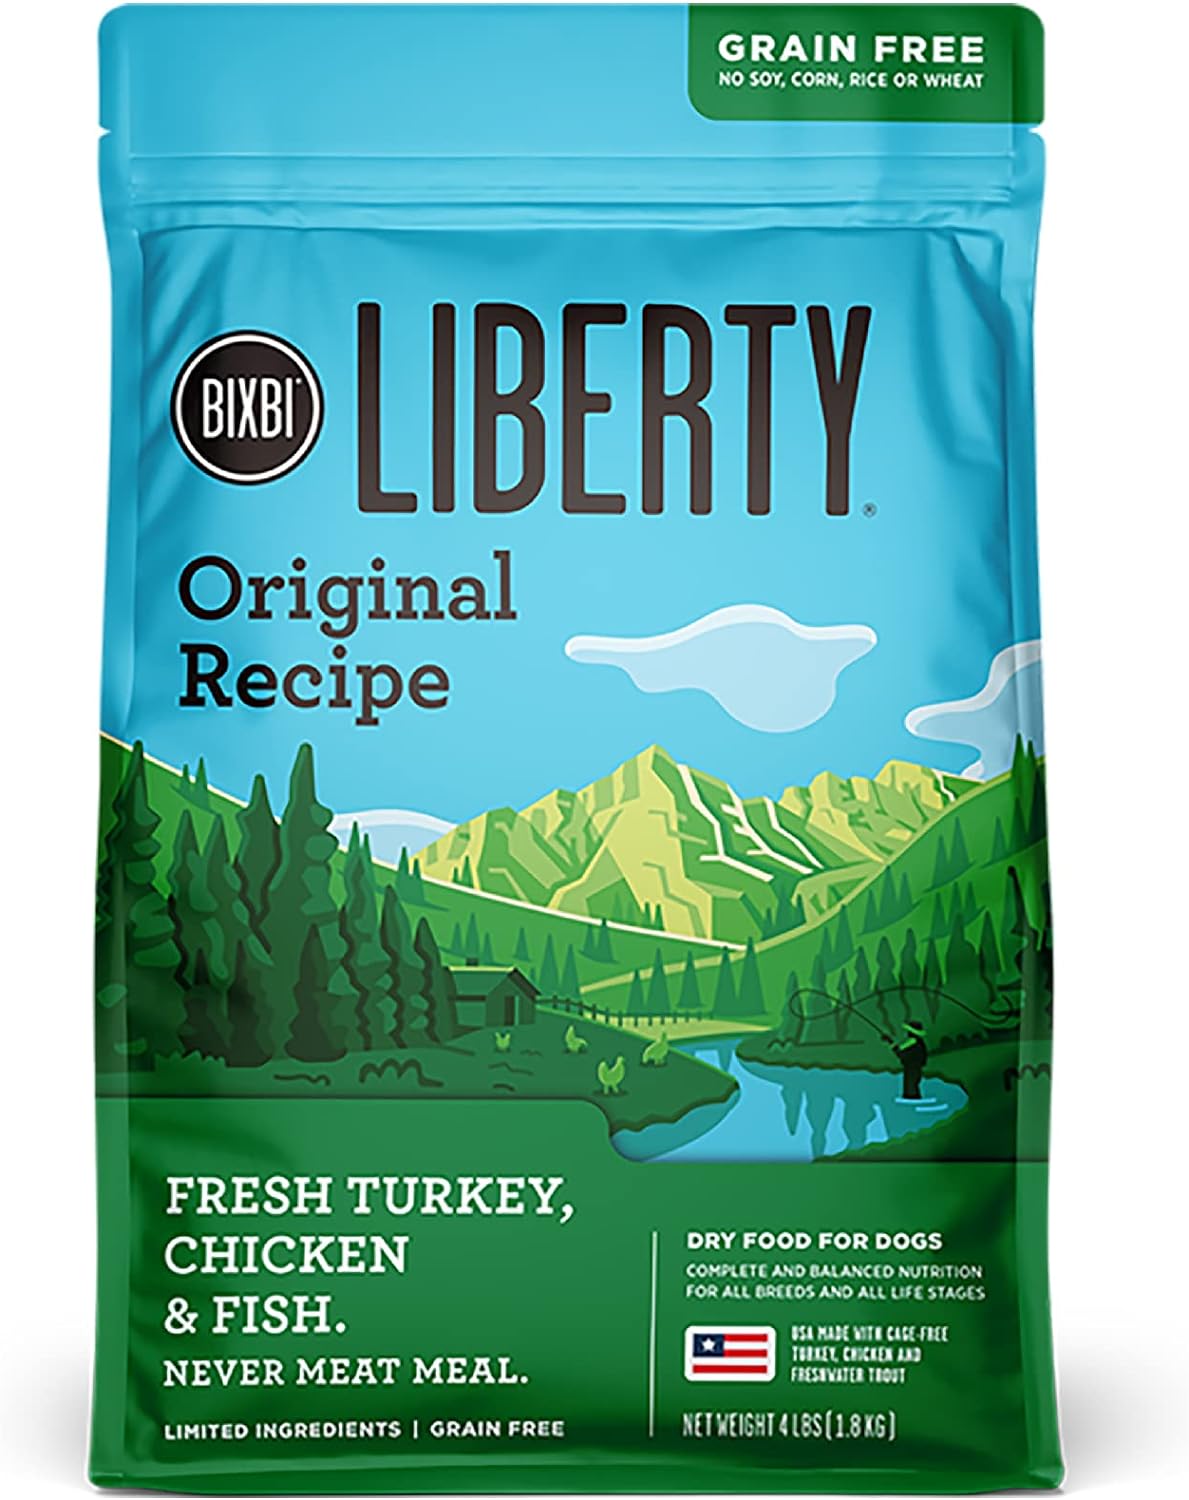 BIXBI Liberty Grain Free Dry Dog Food, Original Recipe, 4 lbs - Fresh Meat, No Meat Meal, No Fillers for Easy Digestion - USA Made